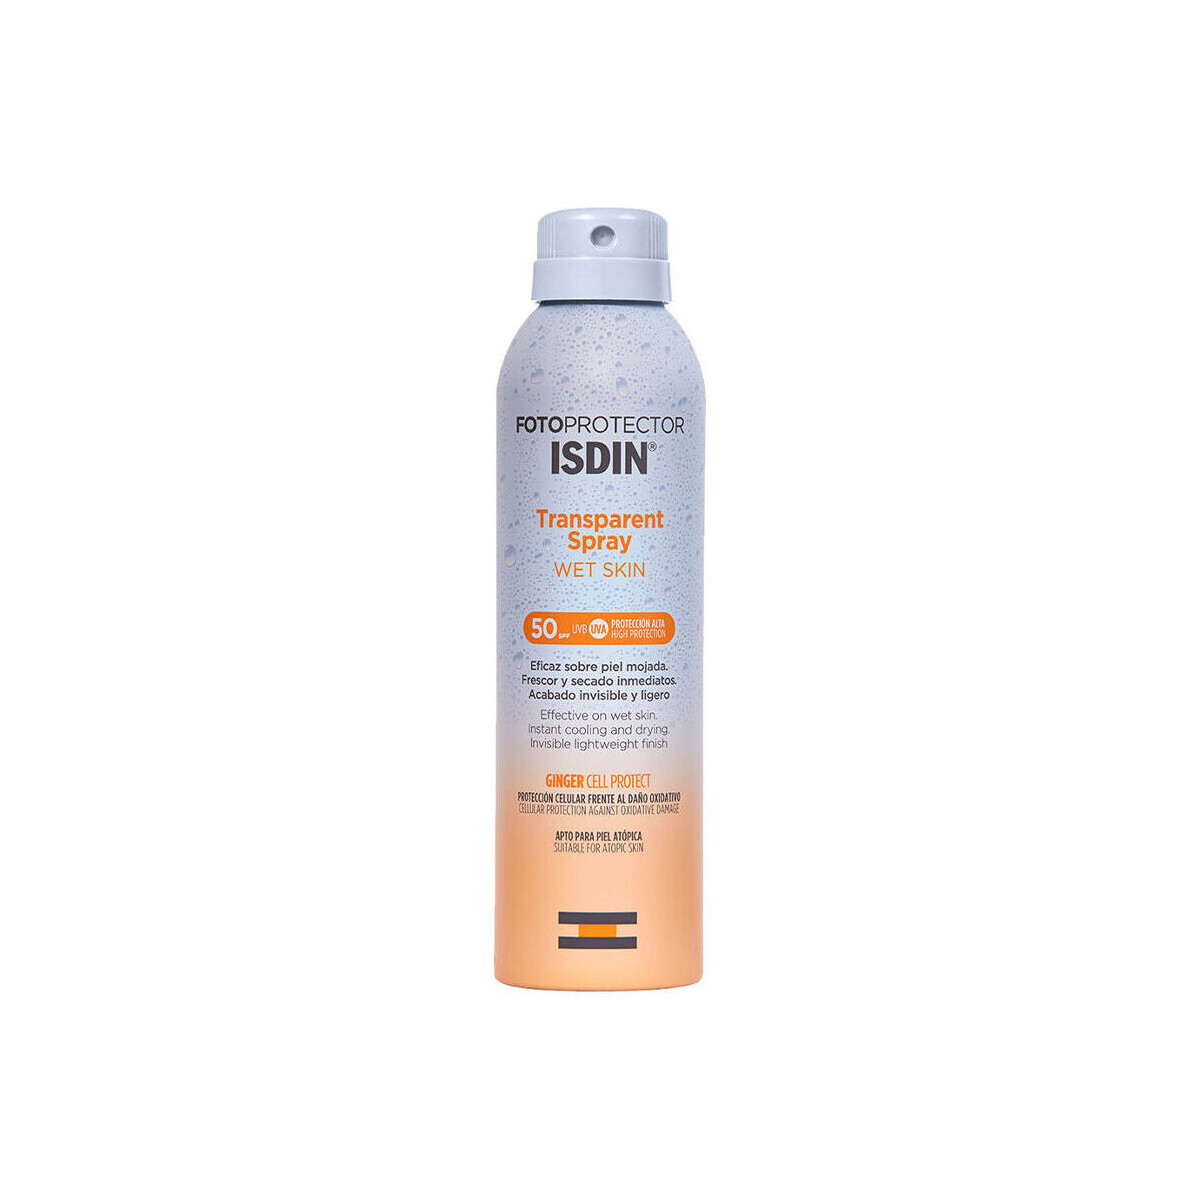 Beauté Protections solaires Isdin Photoprotector Spray Transparent Peau Mouillée Spf50+ 